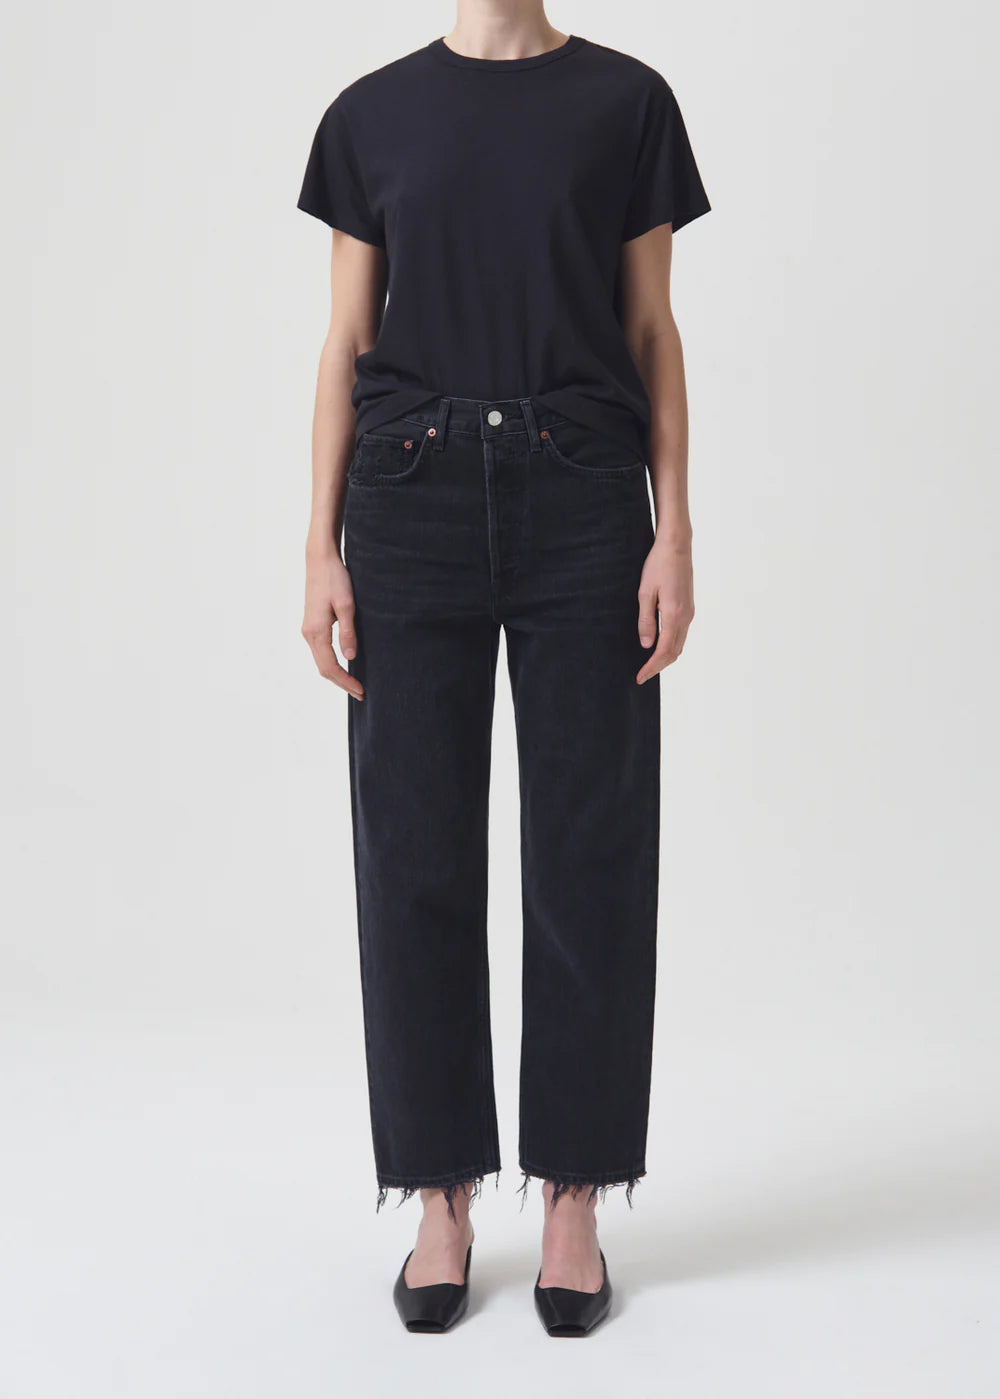 A woman wearing AGOLDE 90's Crop - Tar black jeans with a cropped inseam and a black t-shirt.